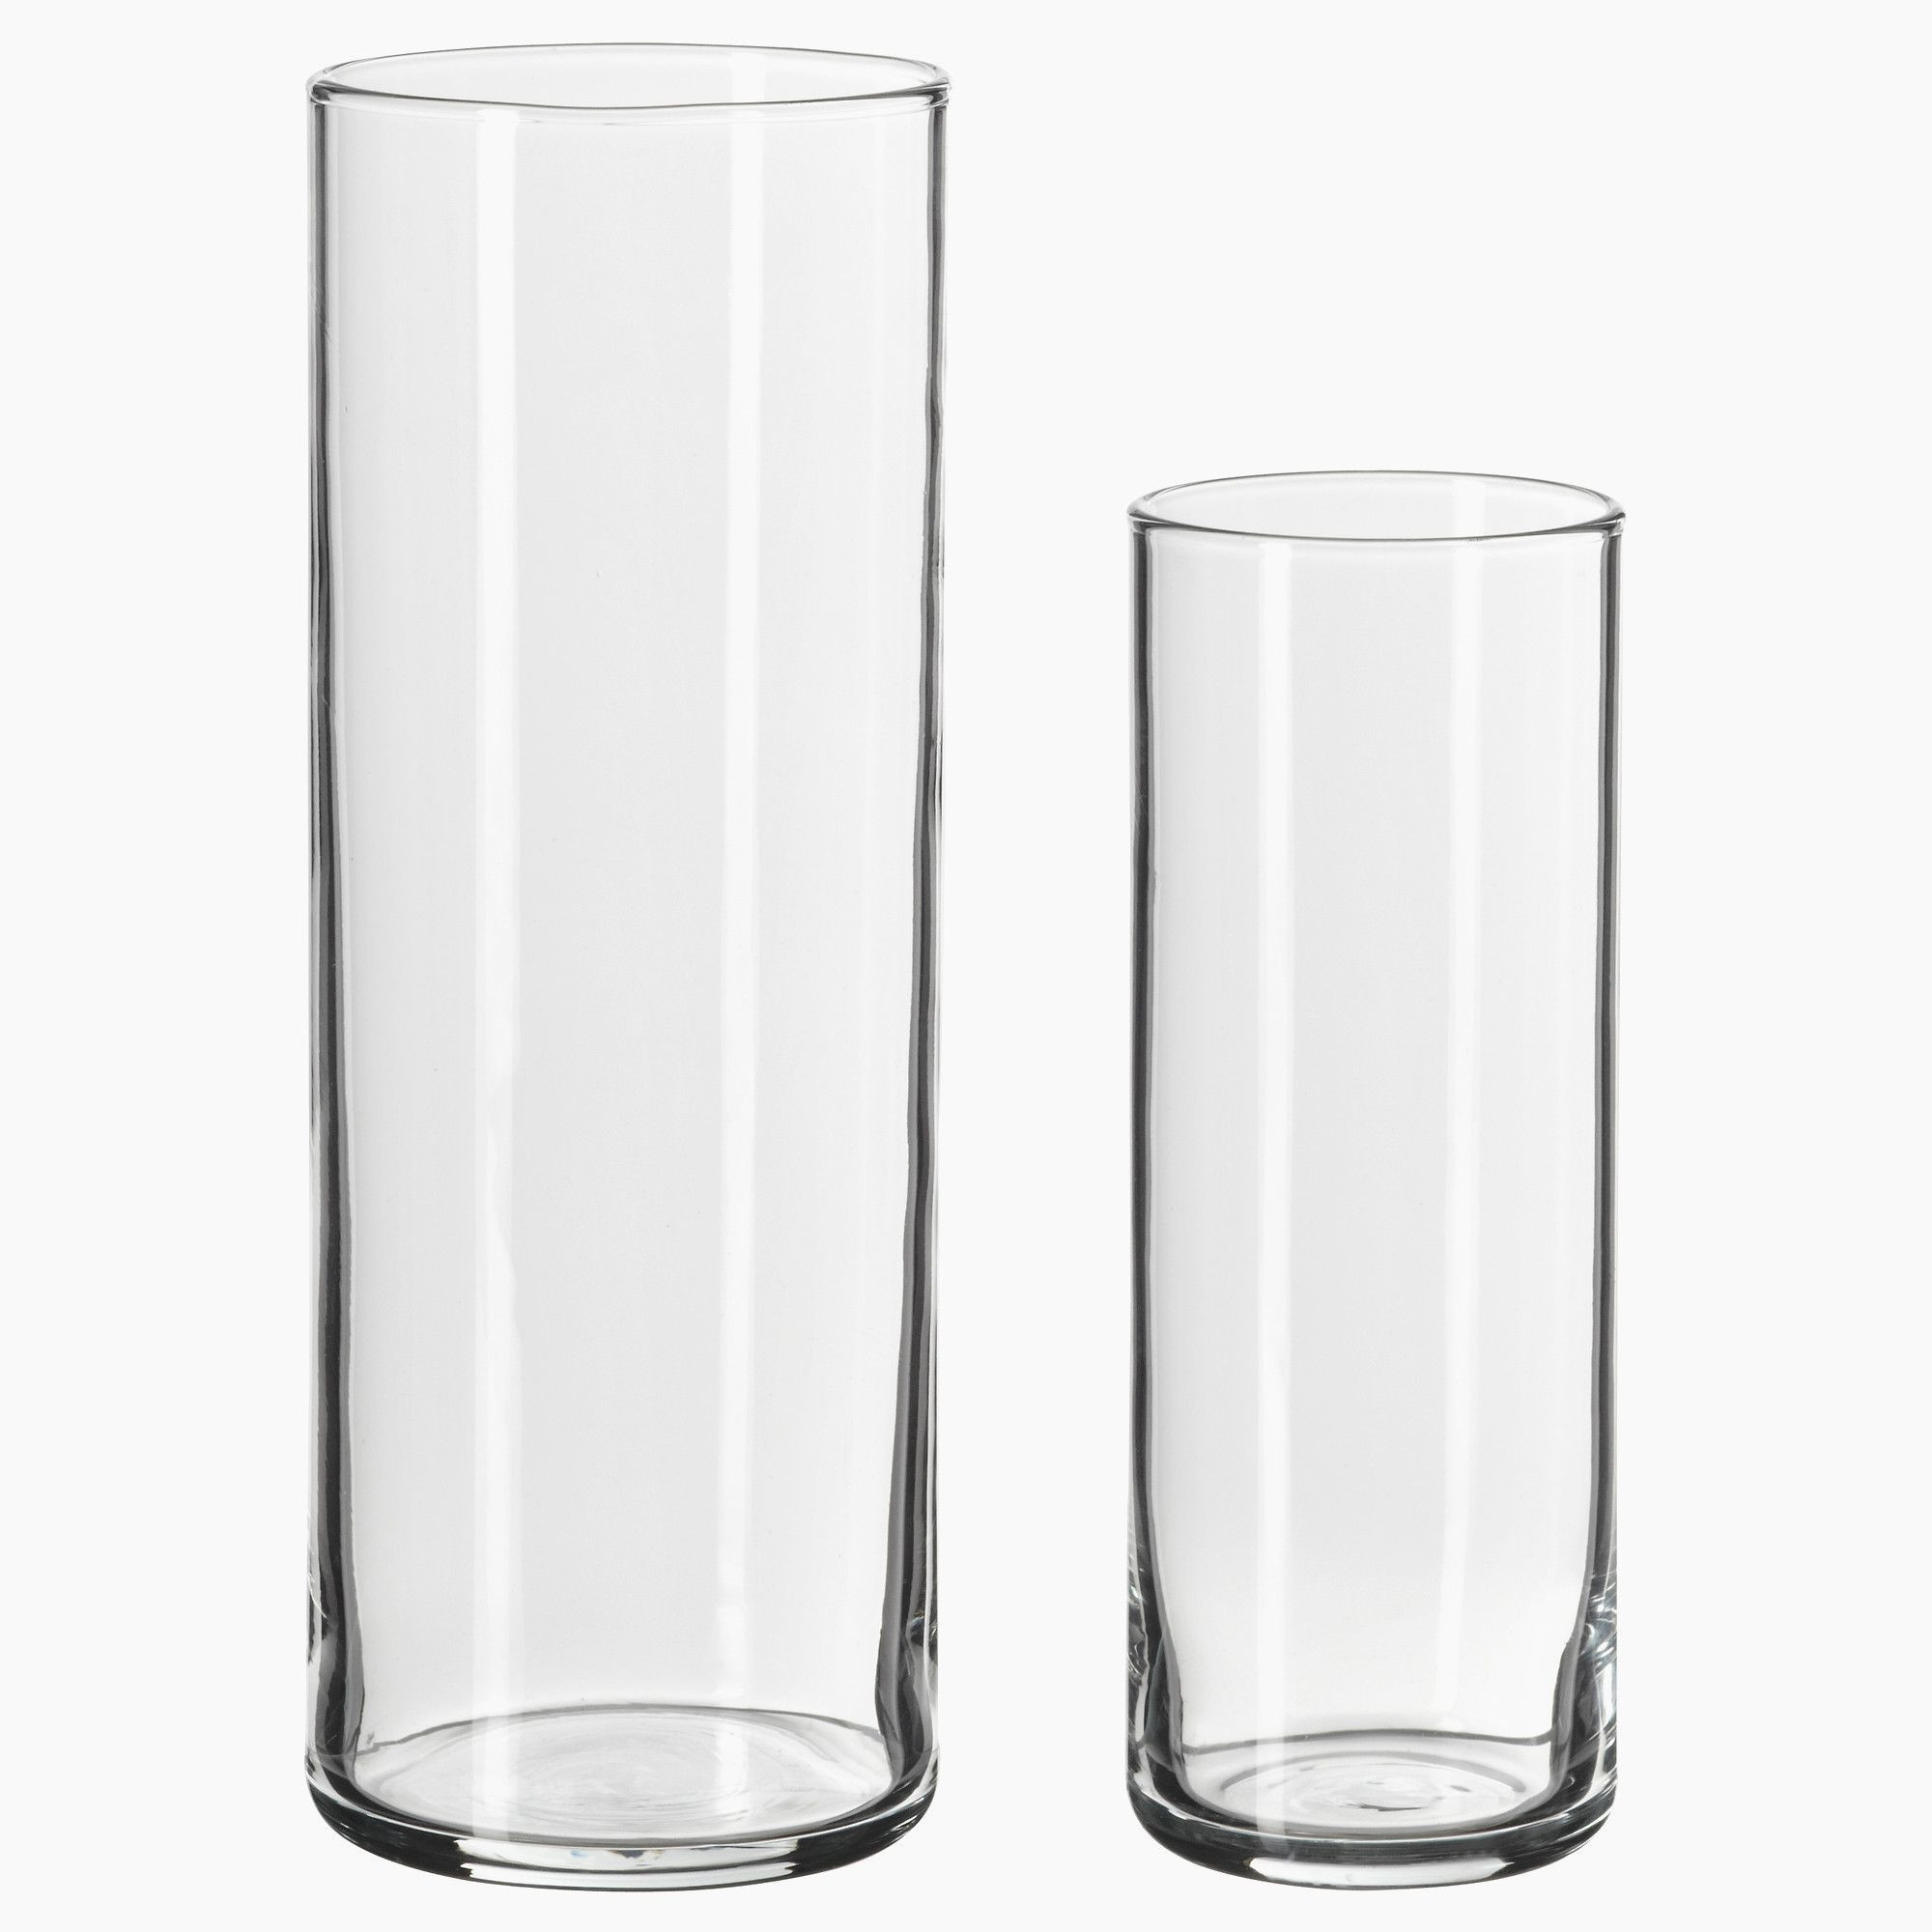 24 inch tall glass vases of 24 tall vases for sale the weekly world pertaining to wooden wall vase new tall vase centerpiece ideas vases flowers in